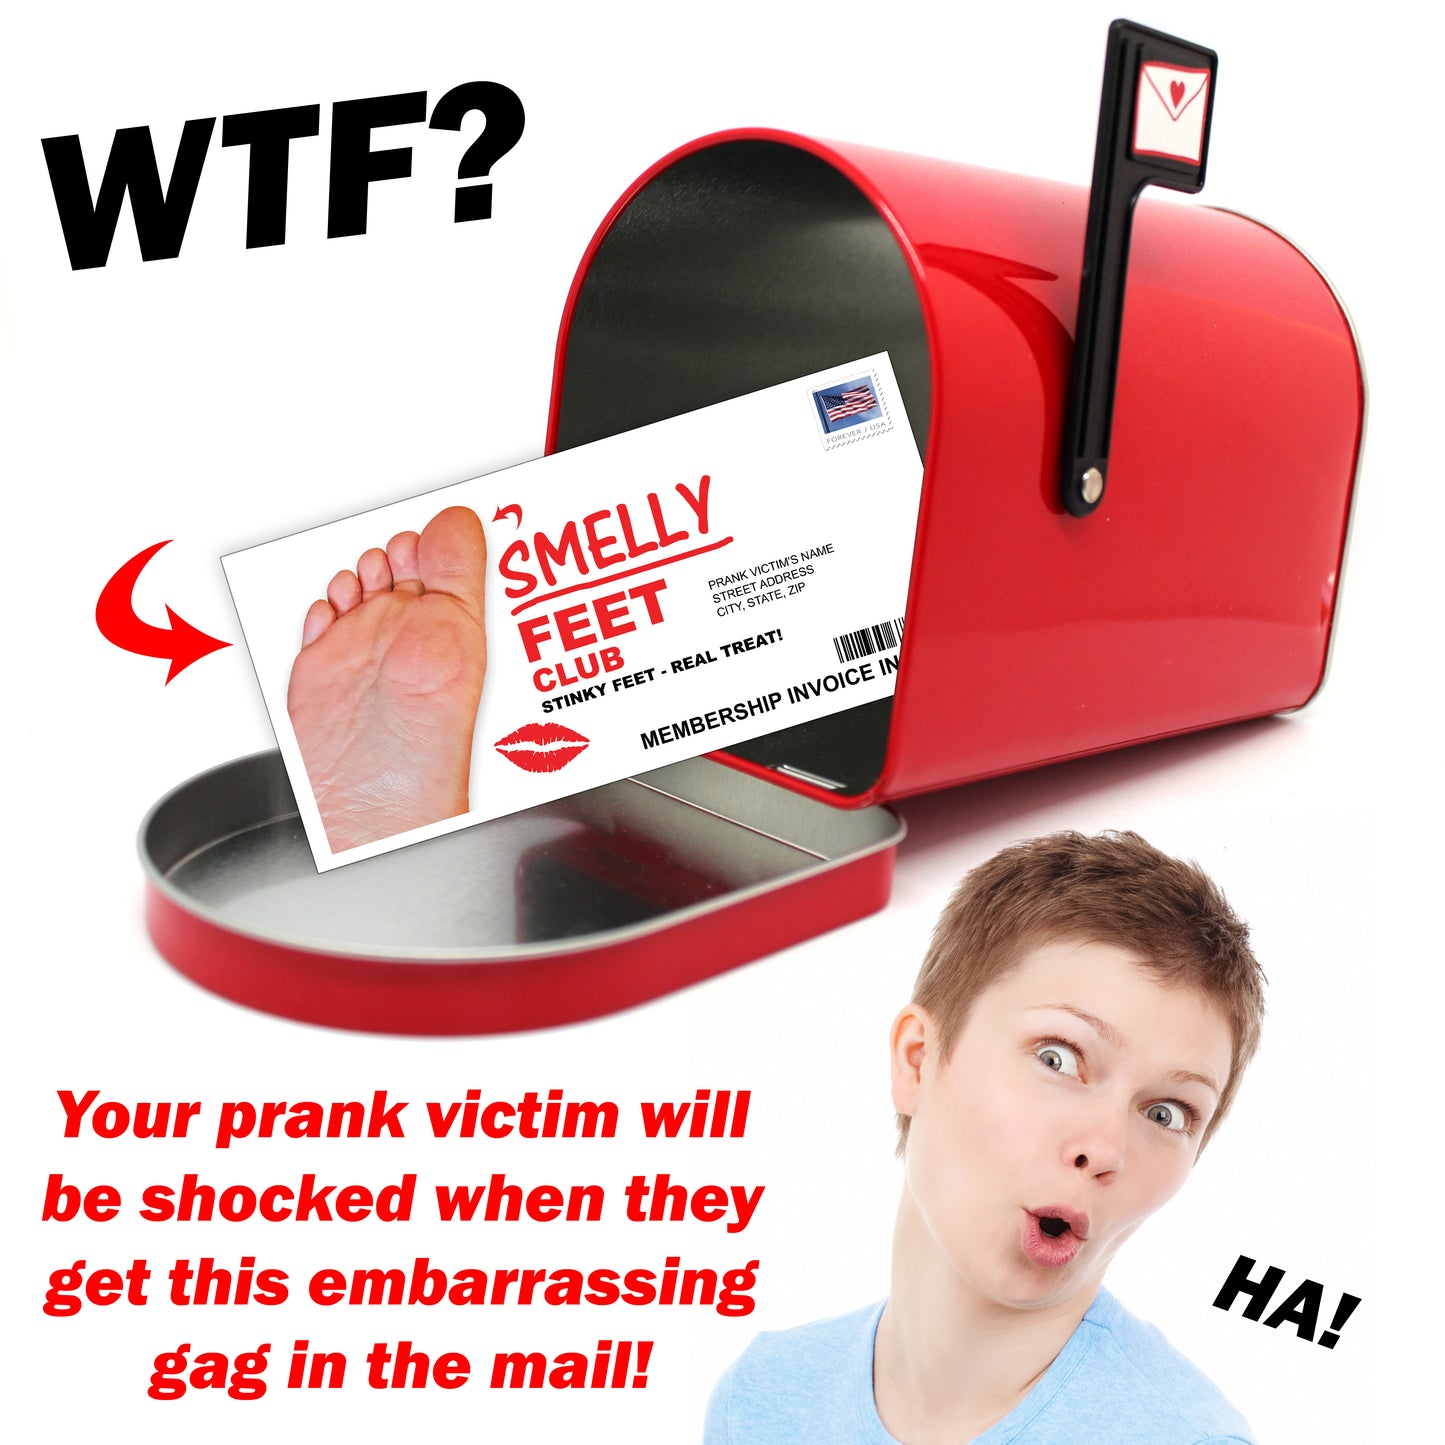 Prank Mail Smelly Feet Club Letter